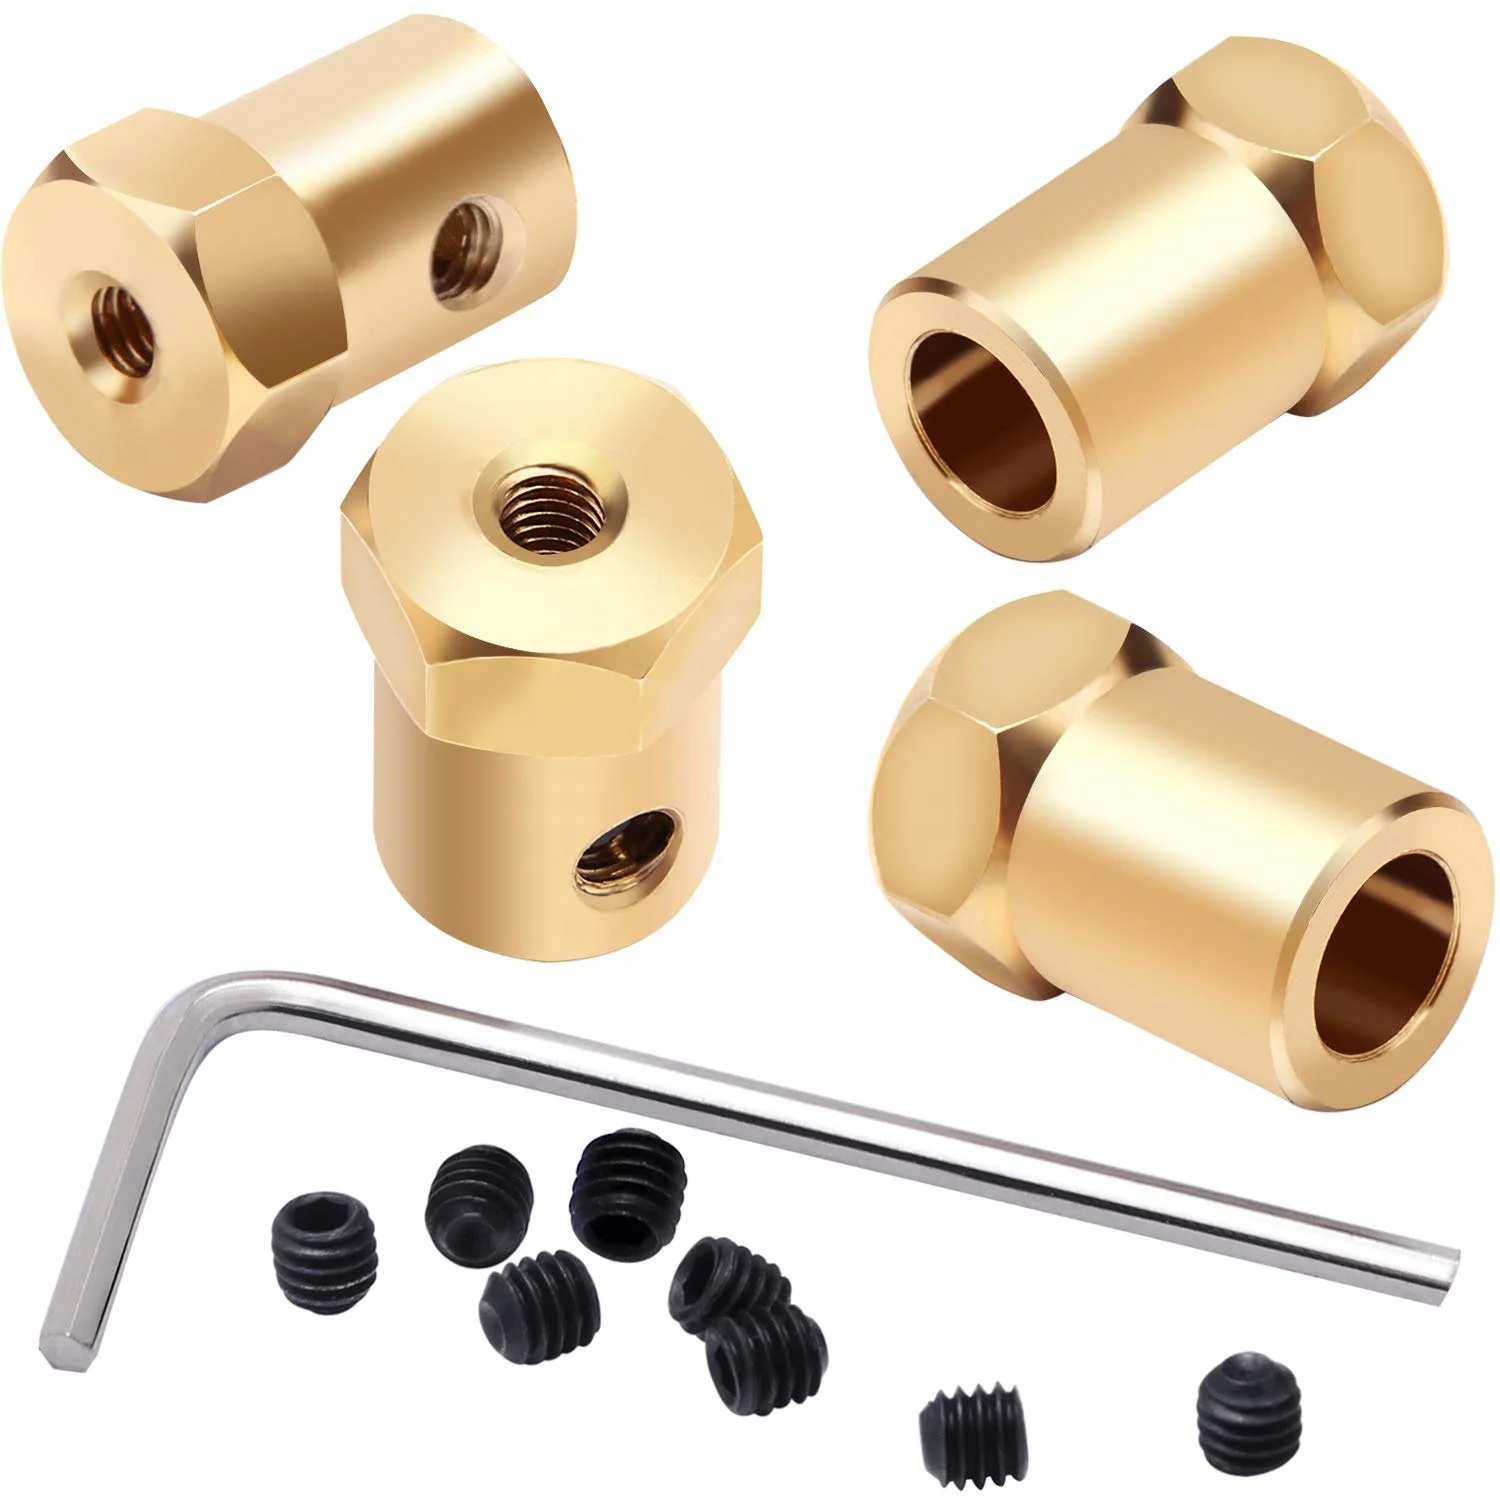 for Model Ships Robots Pack Of 5 Shaft Coupler Motor Copper Connector 3mm to 4mm Copper Wide Application Shaft Coupling Coupler DIY Coupling Transfer Joint 